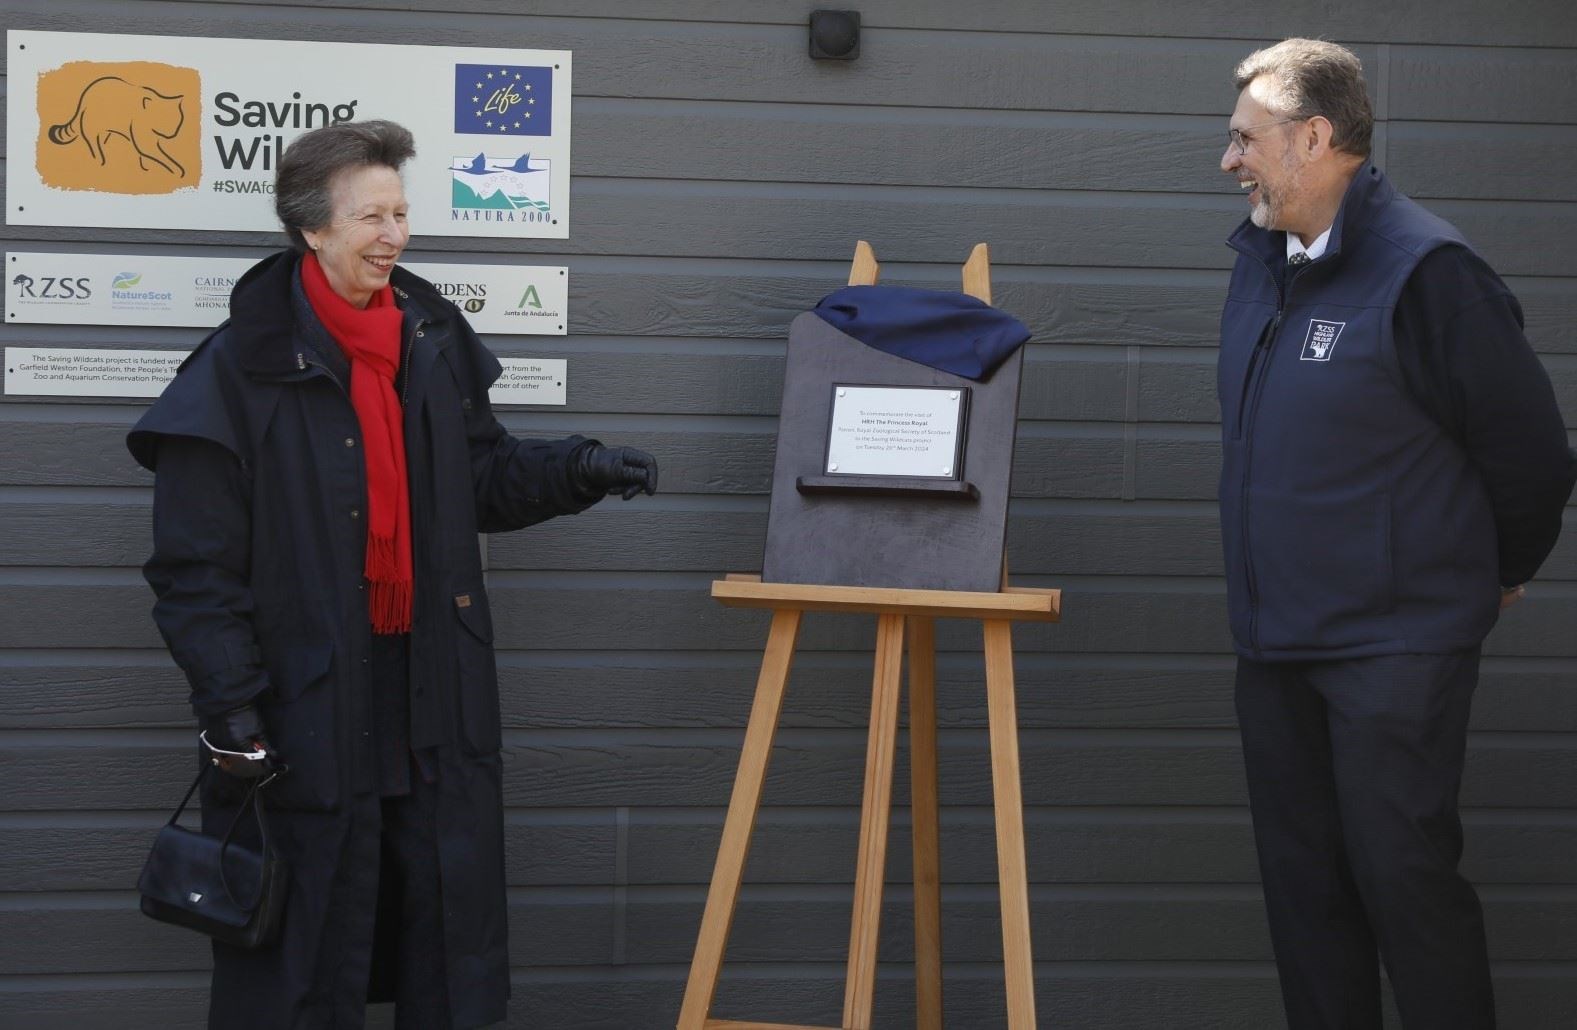 HRH the Princess Royal was invited by Highland Wildlife Park chief David Field to unveil a plaque commemorating her visit this week.